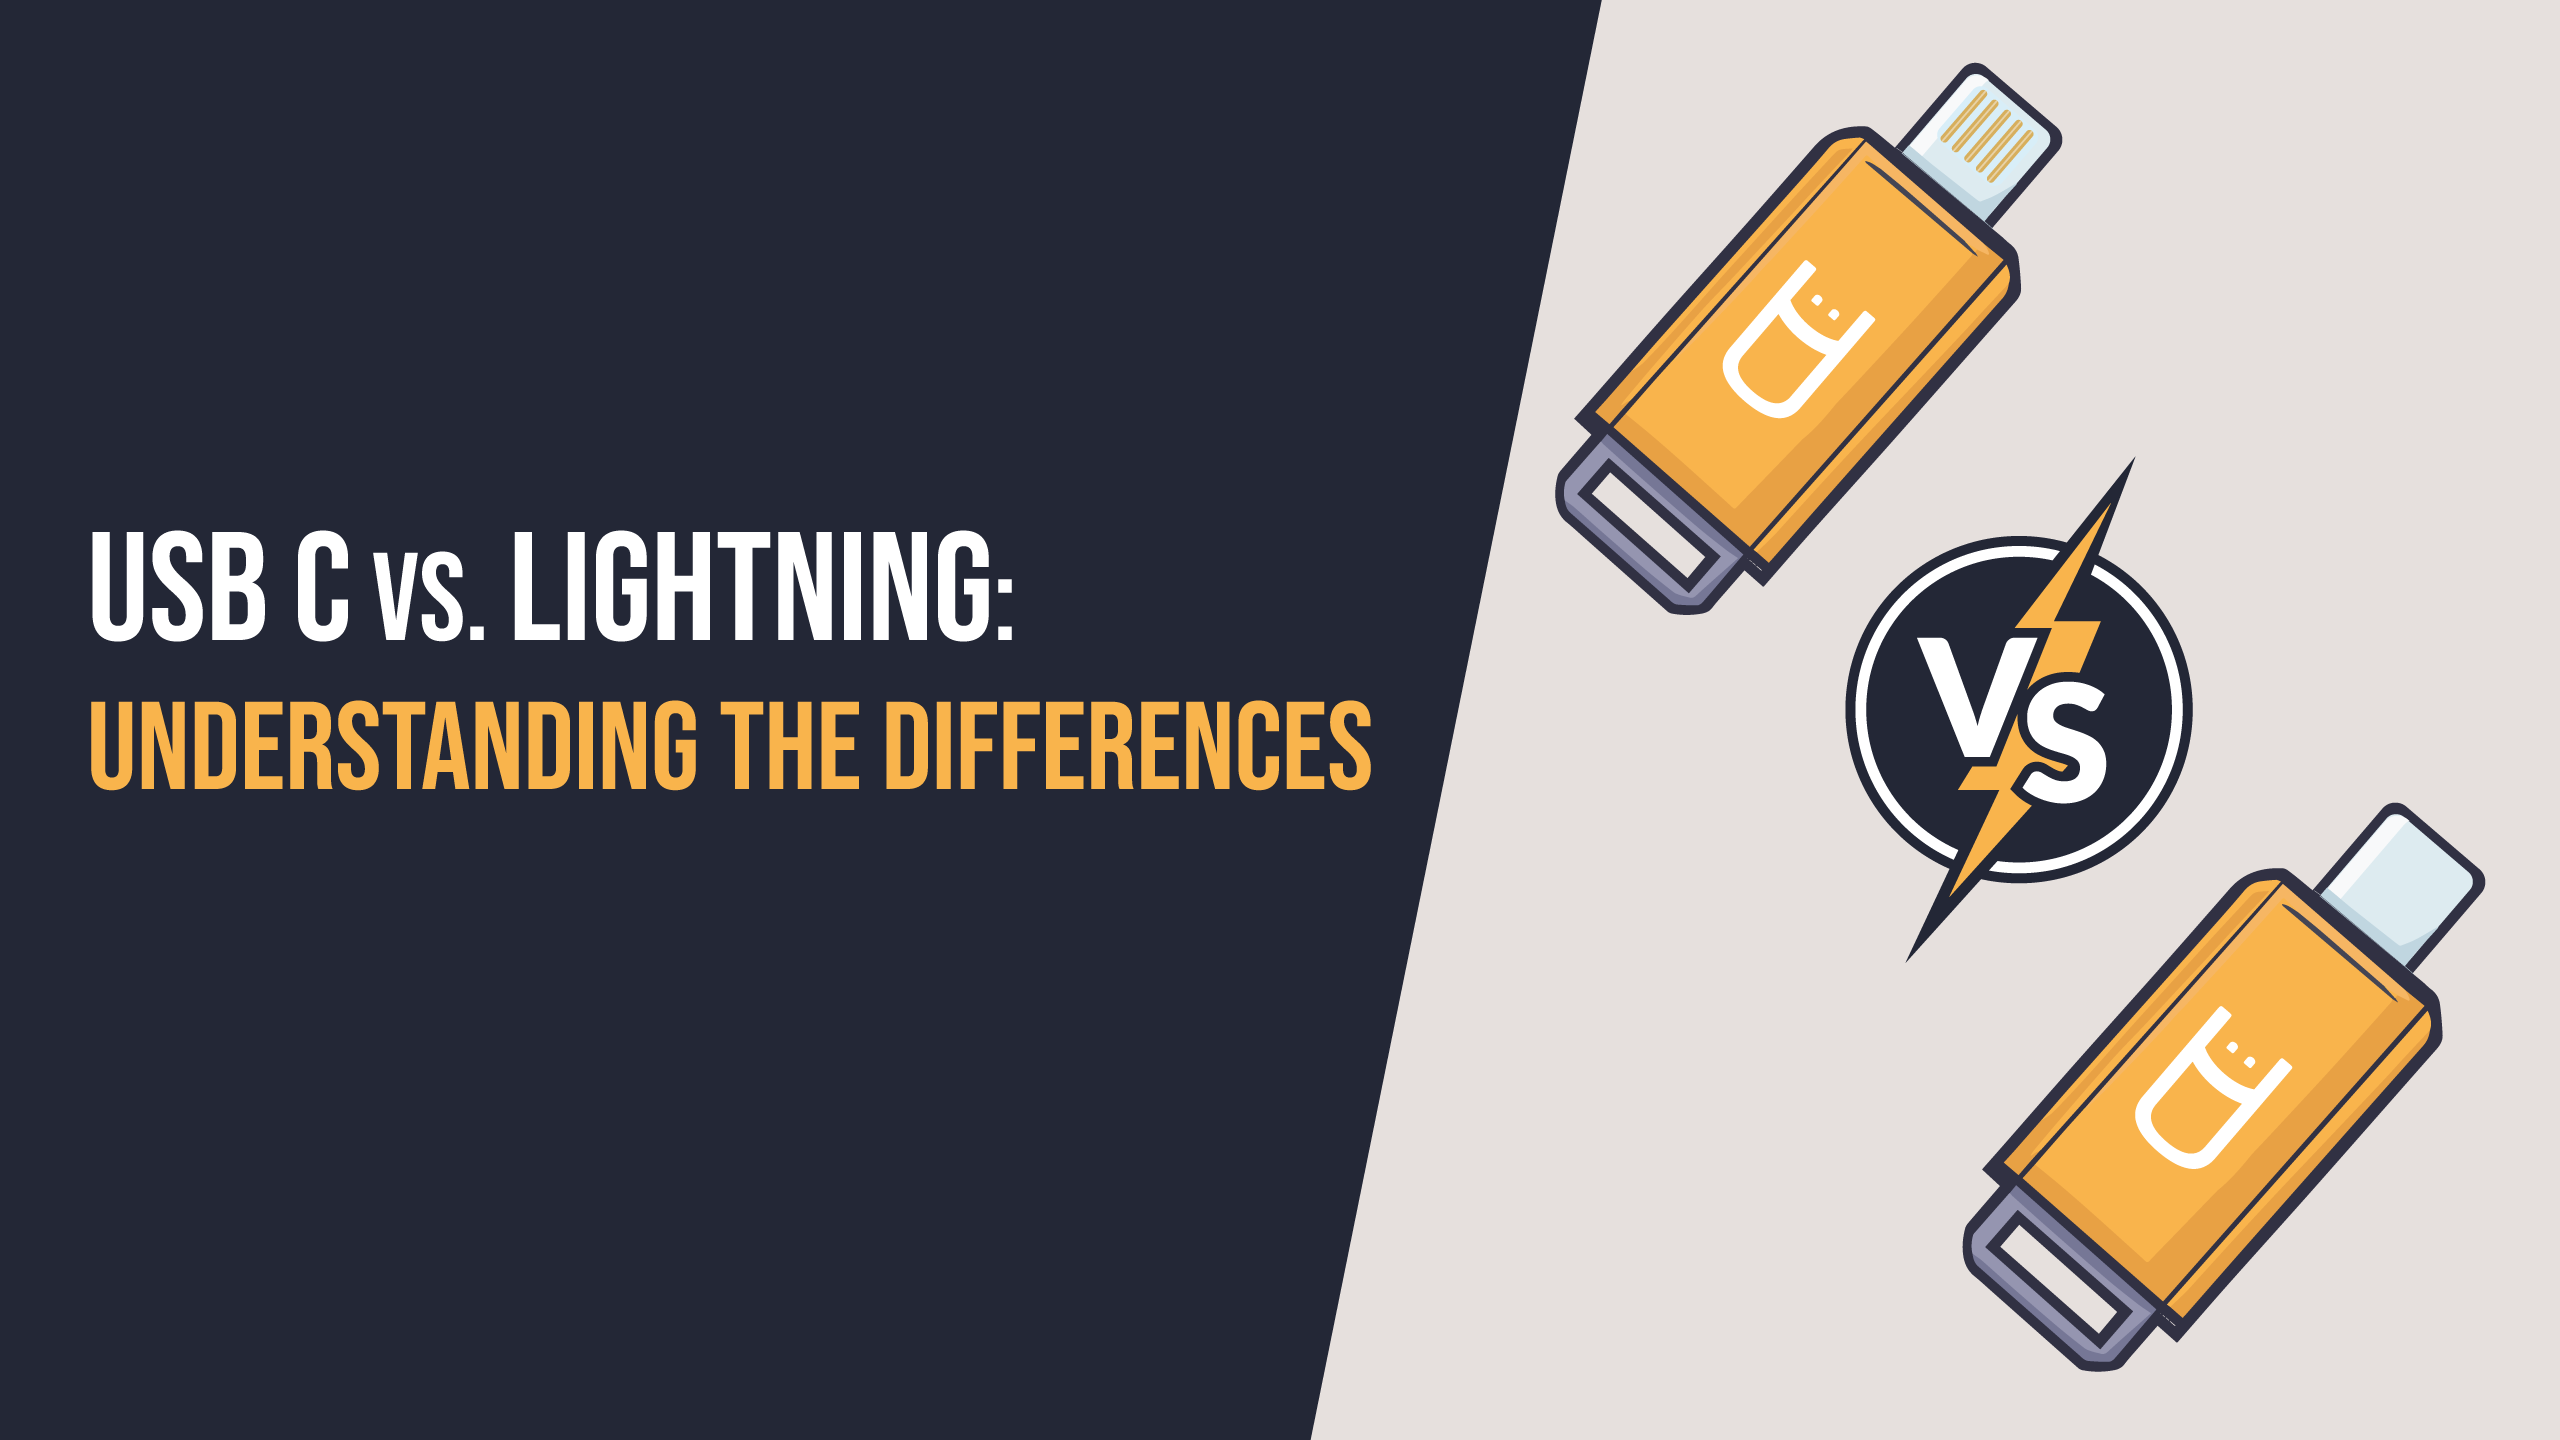 Lightning: Understanding the Differences